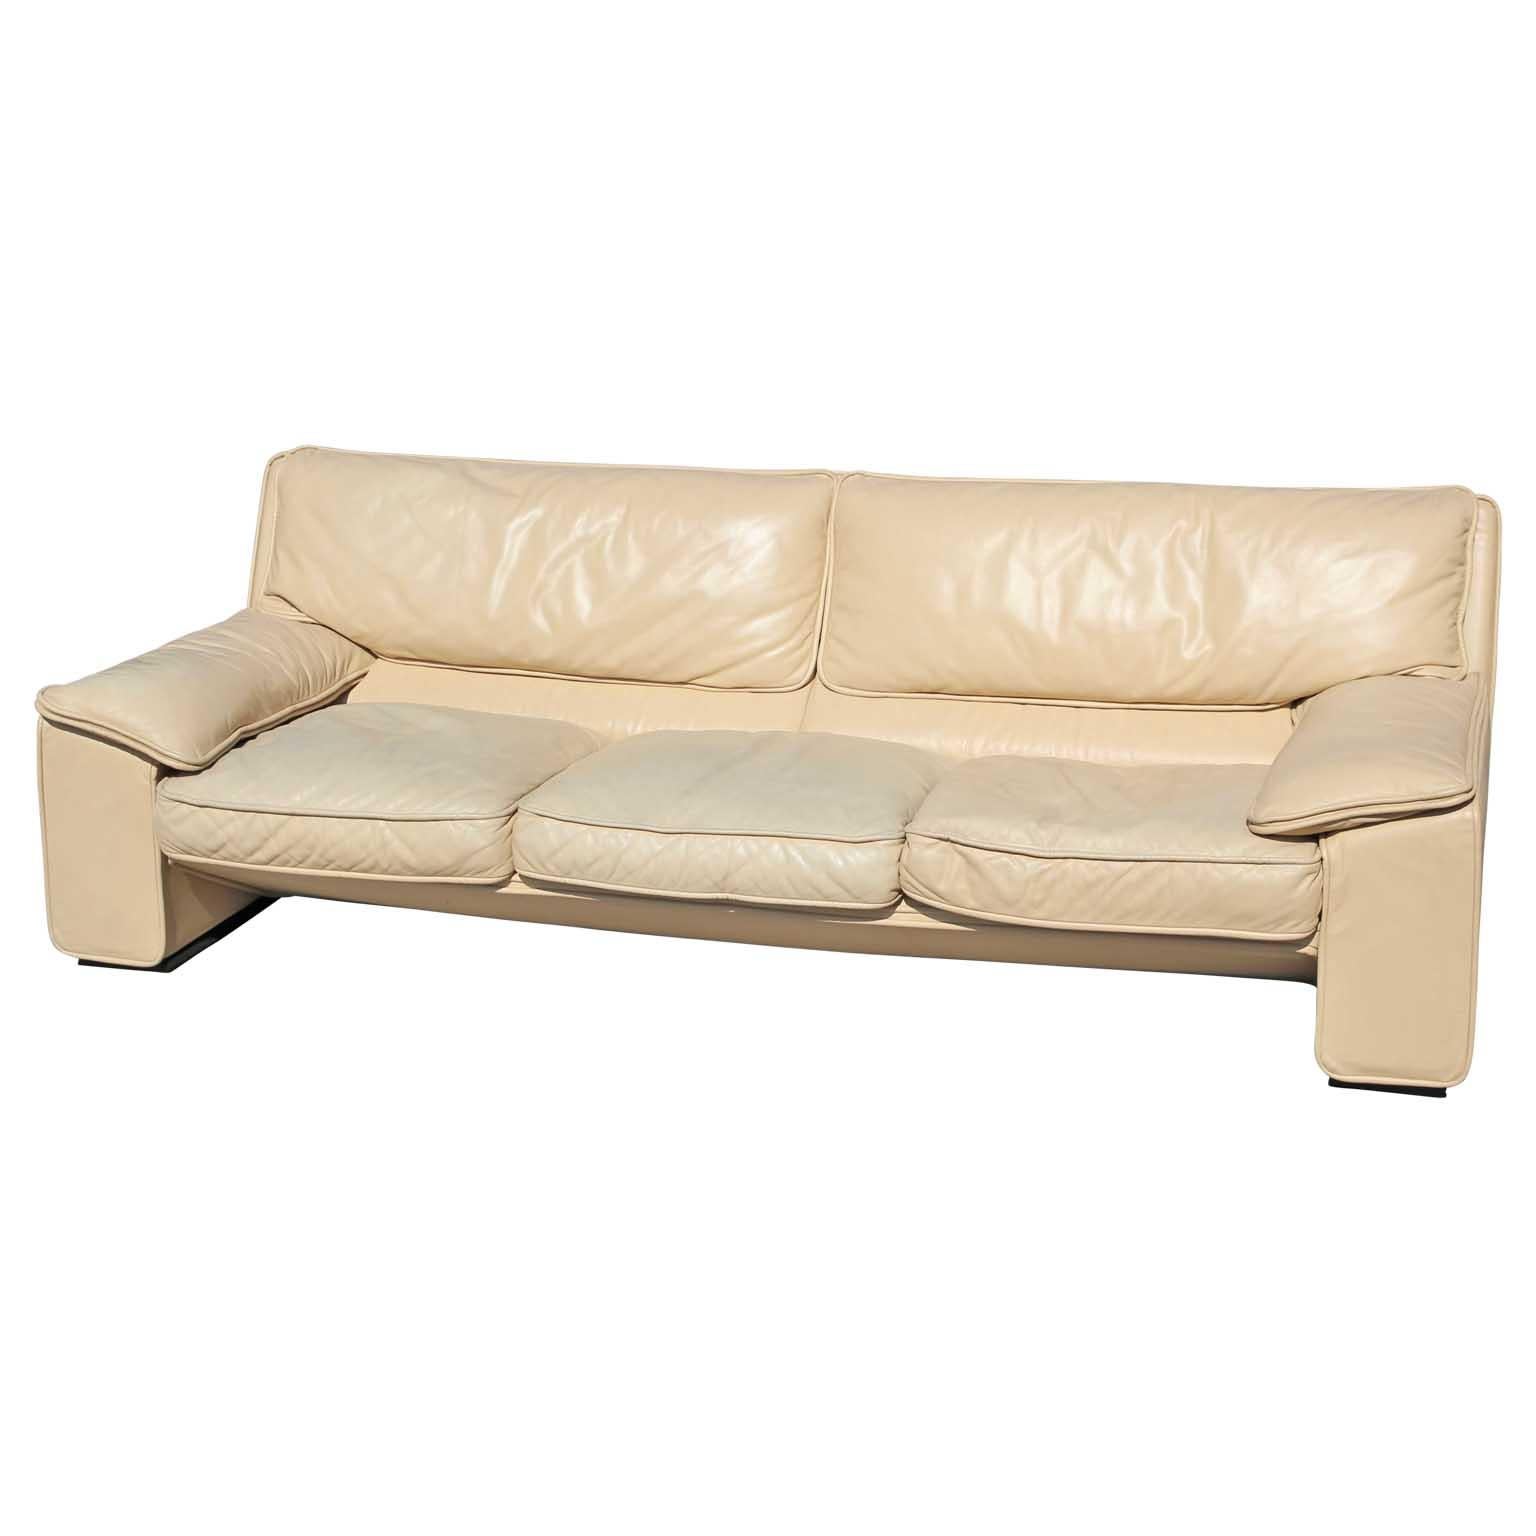 Brunati Italian Postmodern cream leather three-seat sofa. Our leather specialist can restore the imperfections for around $900 if desired.

Measures: H 30 x W 90 x D 35
SH 14.
    